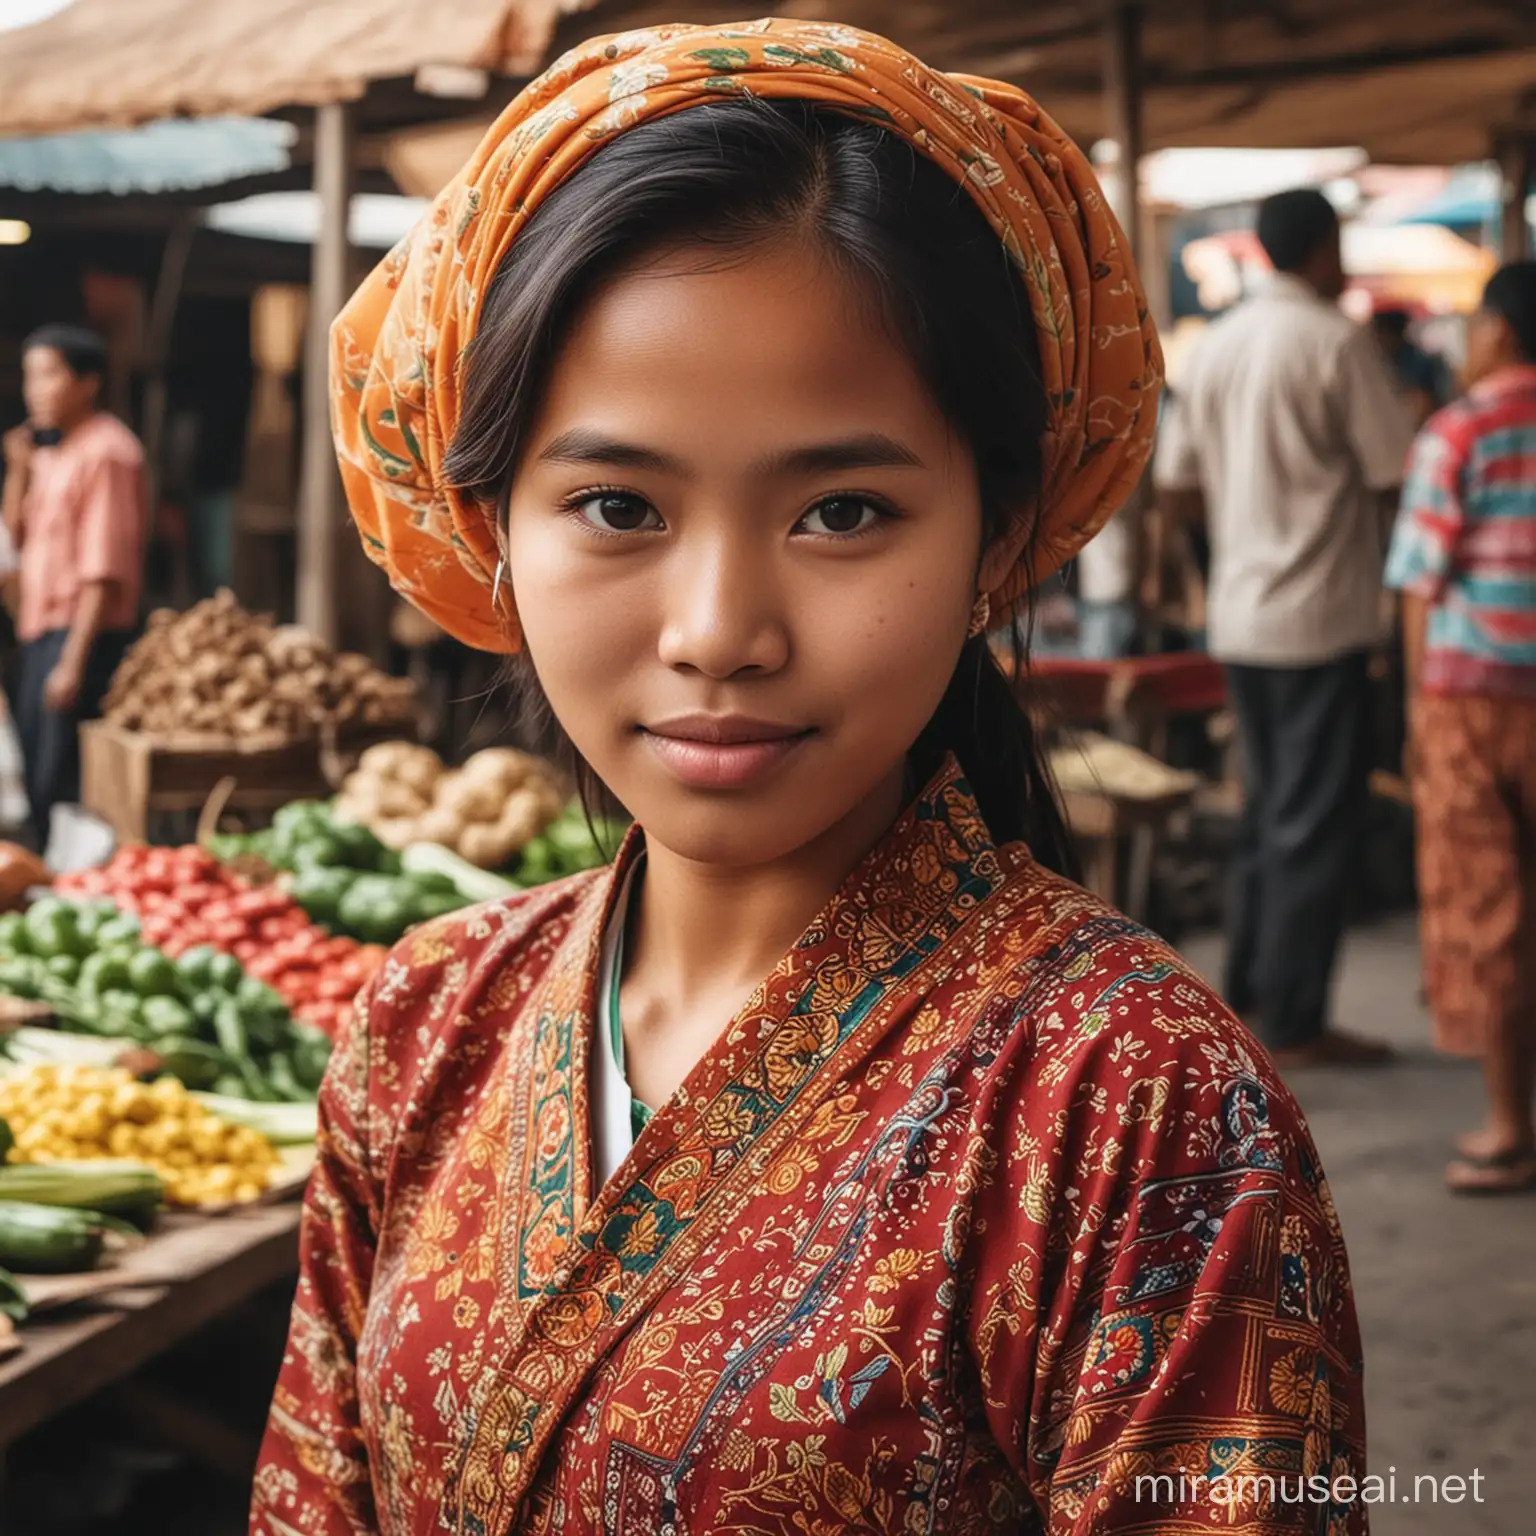 An indonesian girl at the tradisional market